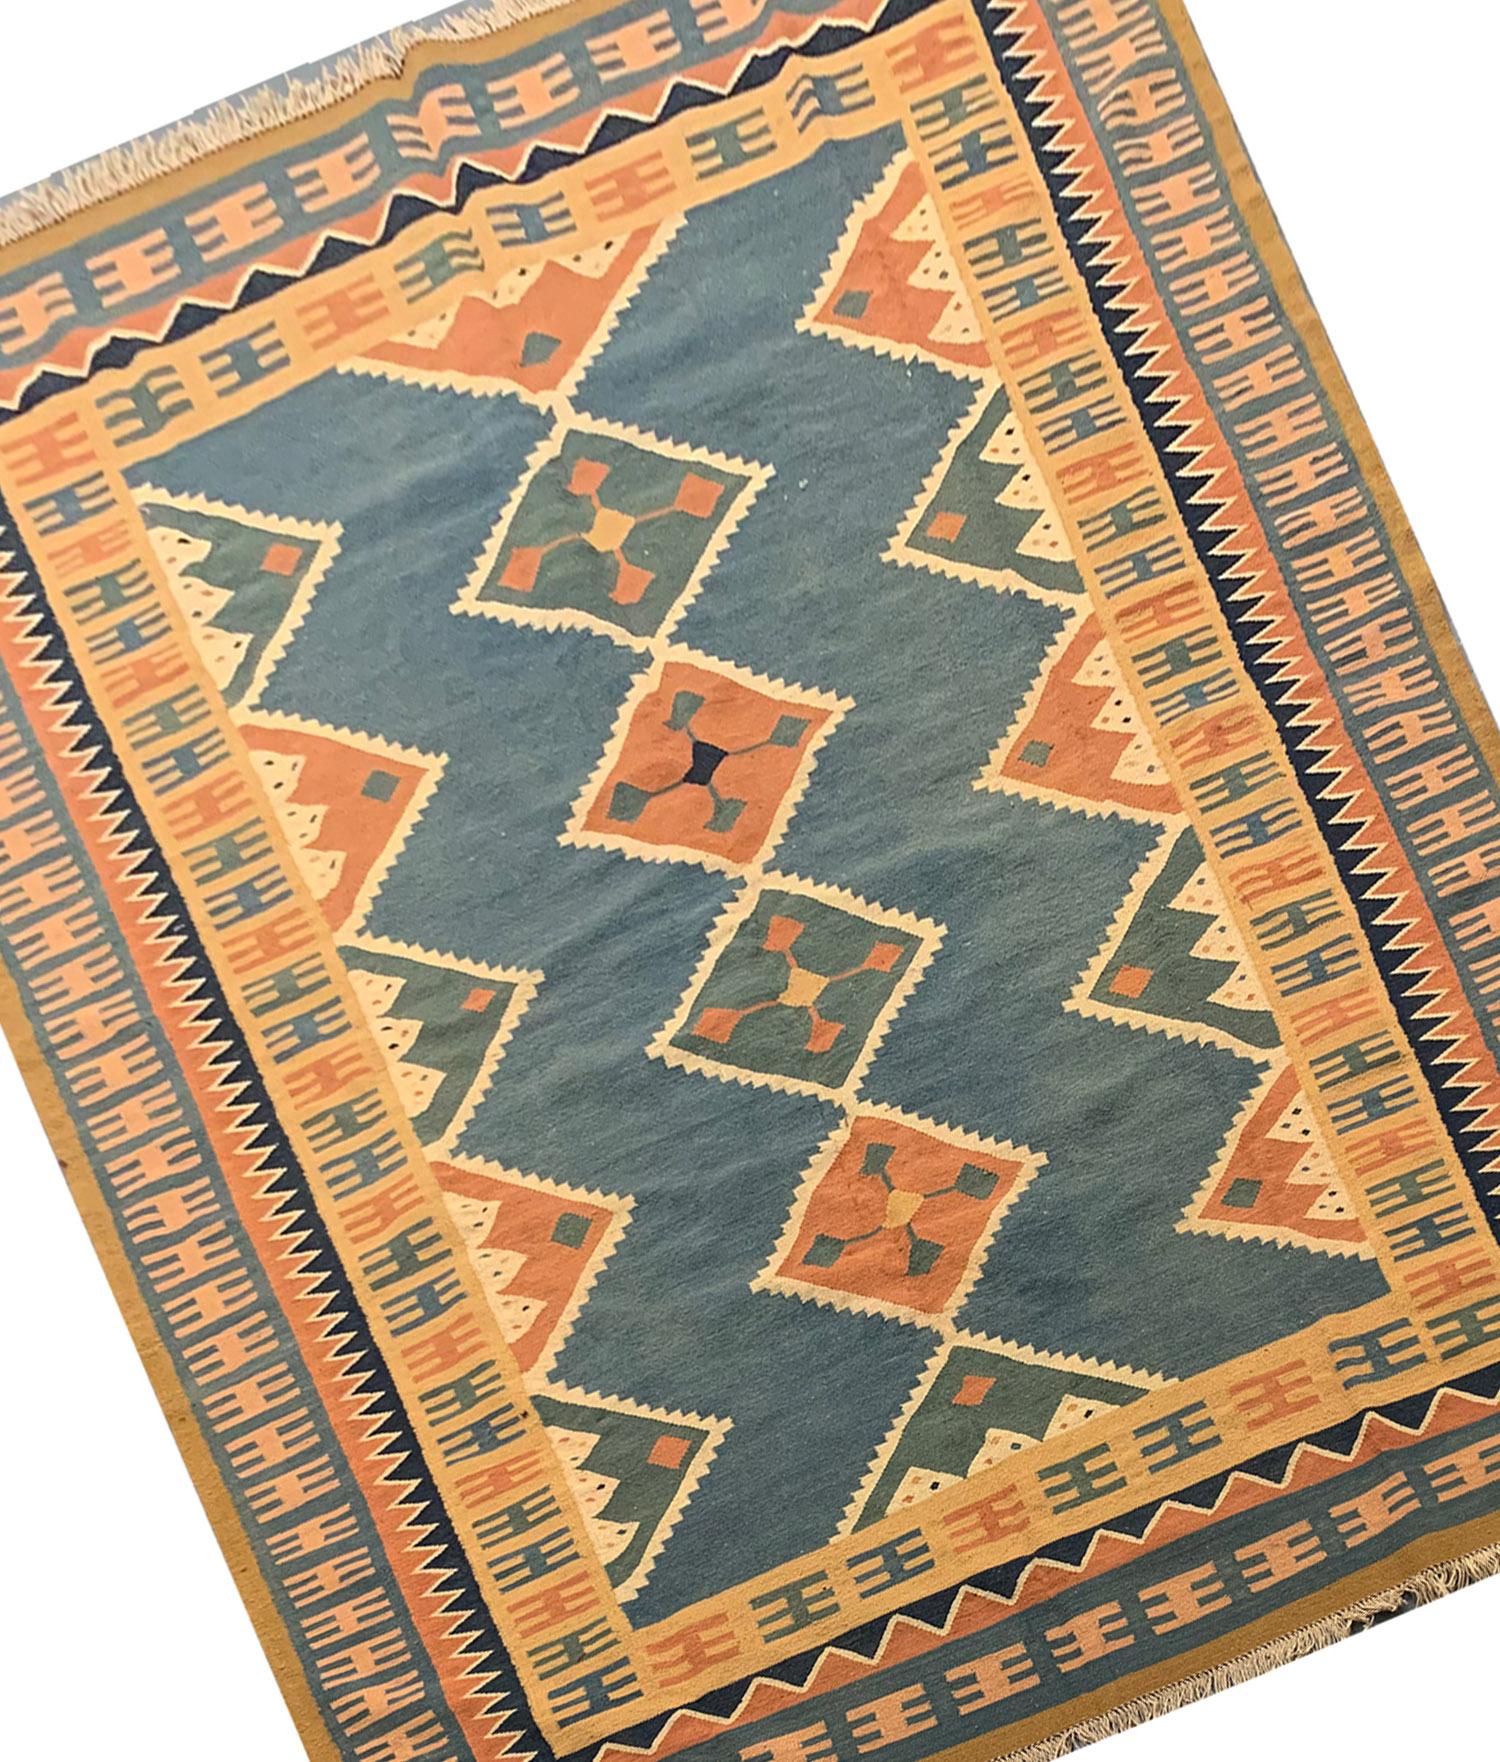 Blue, orange and cream make up the main accent colours in this simple, elegant vintage Kilim. Woven by hand in the 1940s by village weavers of Azerbaijan known for their finely woven village kilims. Featuring a bold geometric diamond design woven